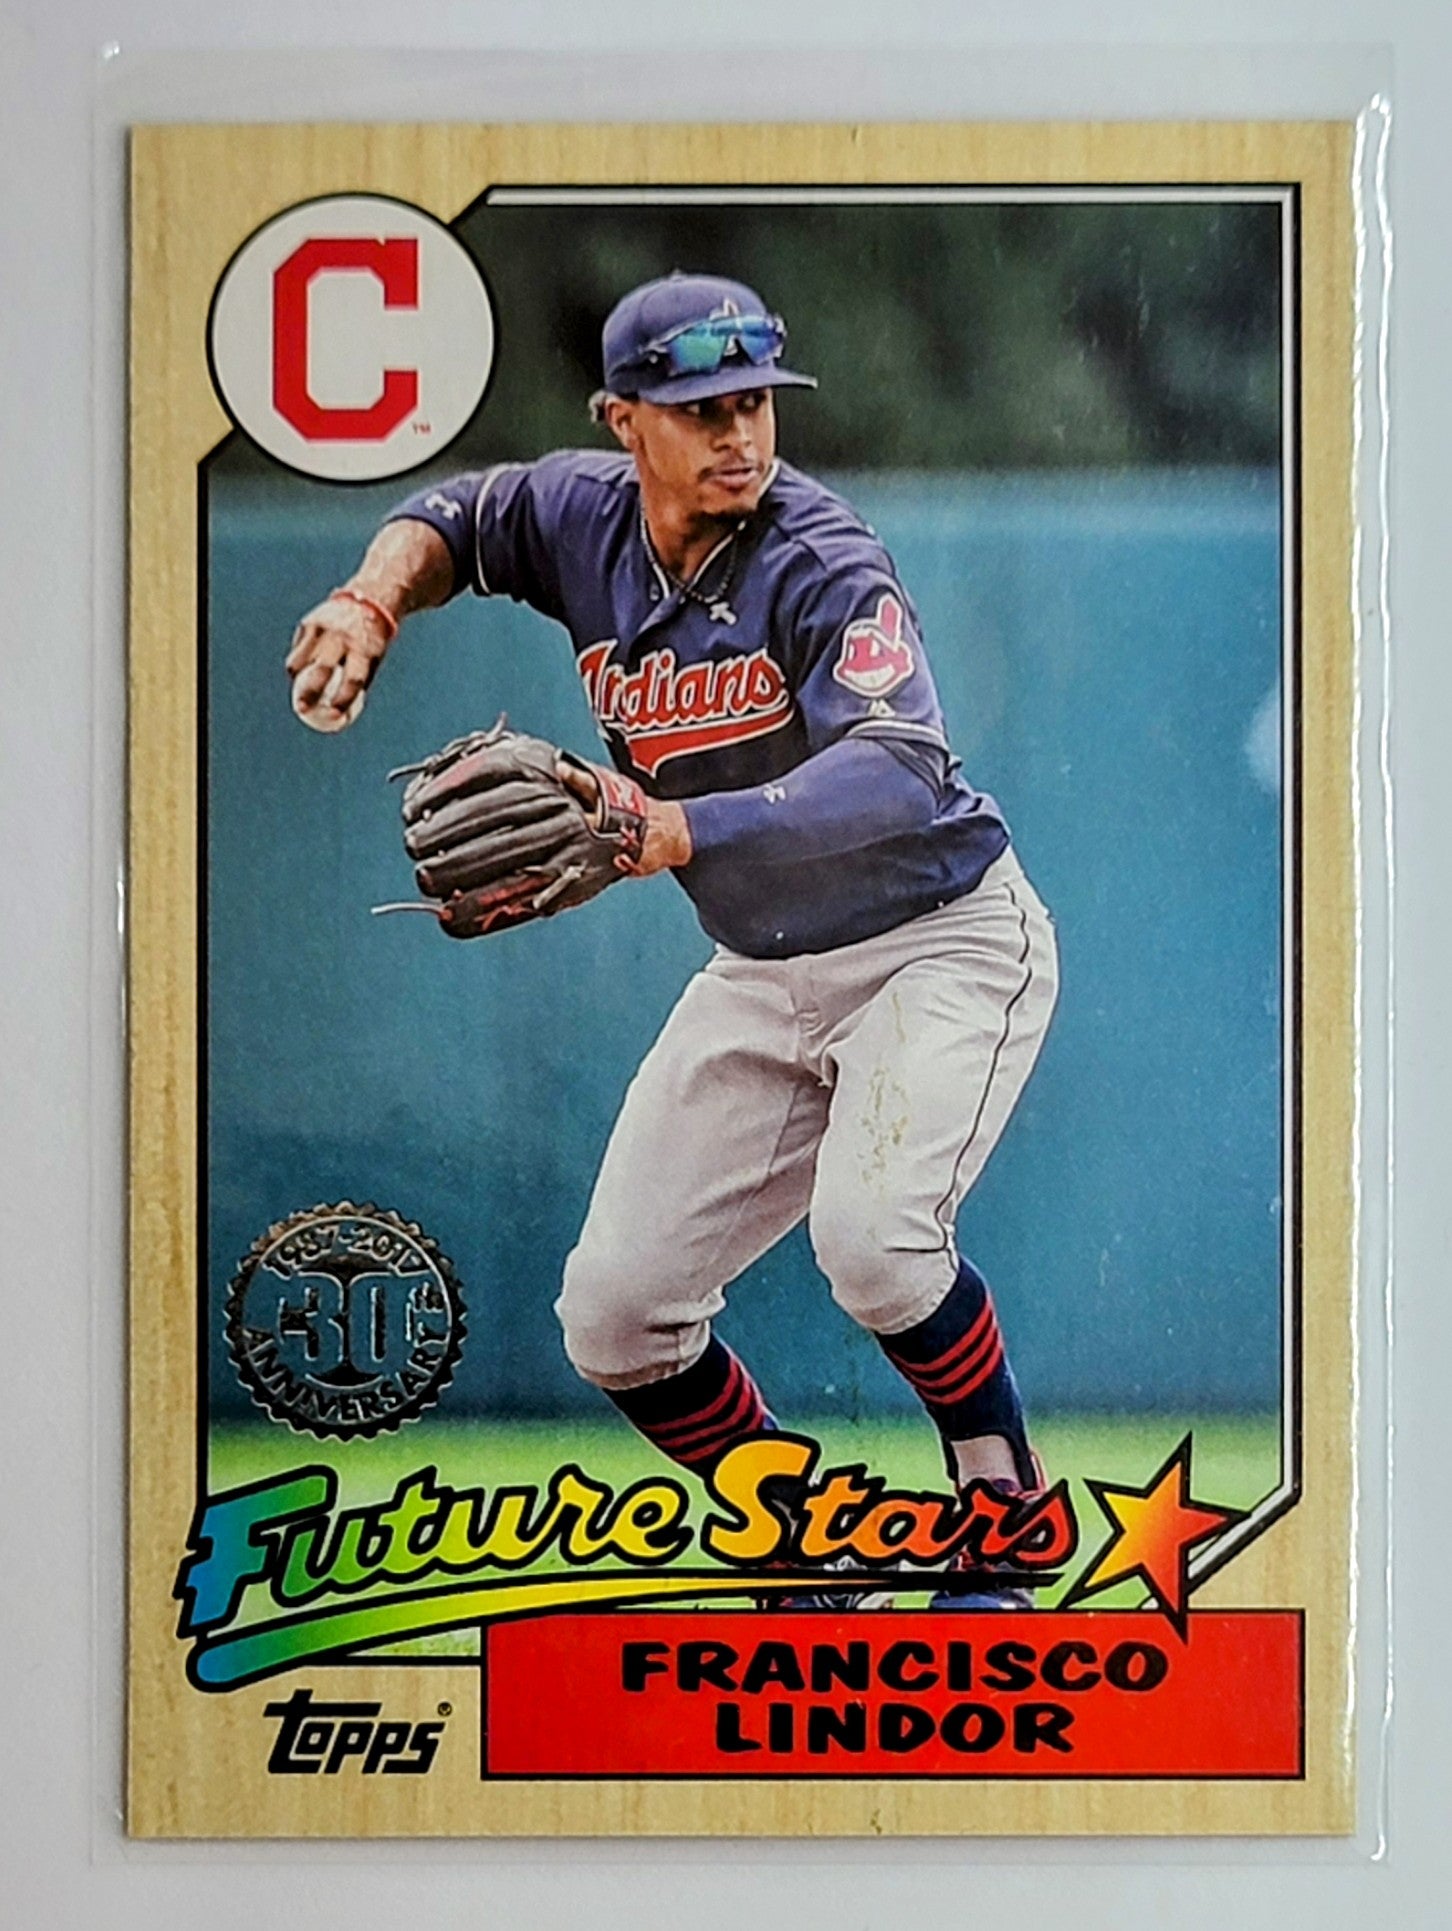 2017 Topps Francisco Lindor
  1987 Topps Baseball  FS Baseball
  Card  TH13C simple Xclusive Collectibles   